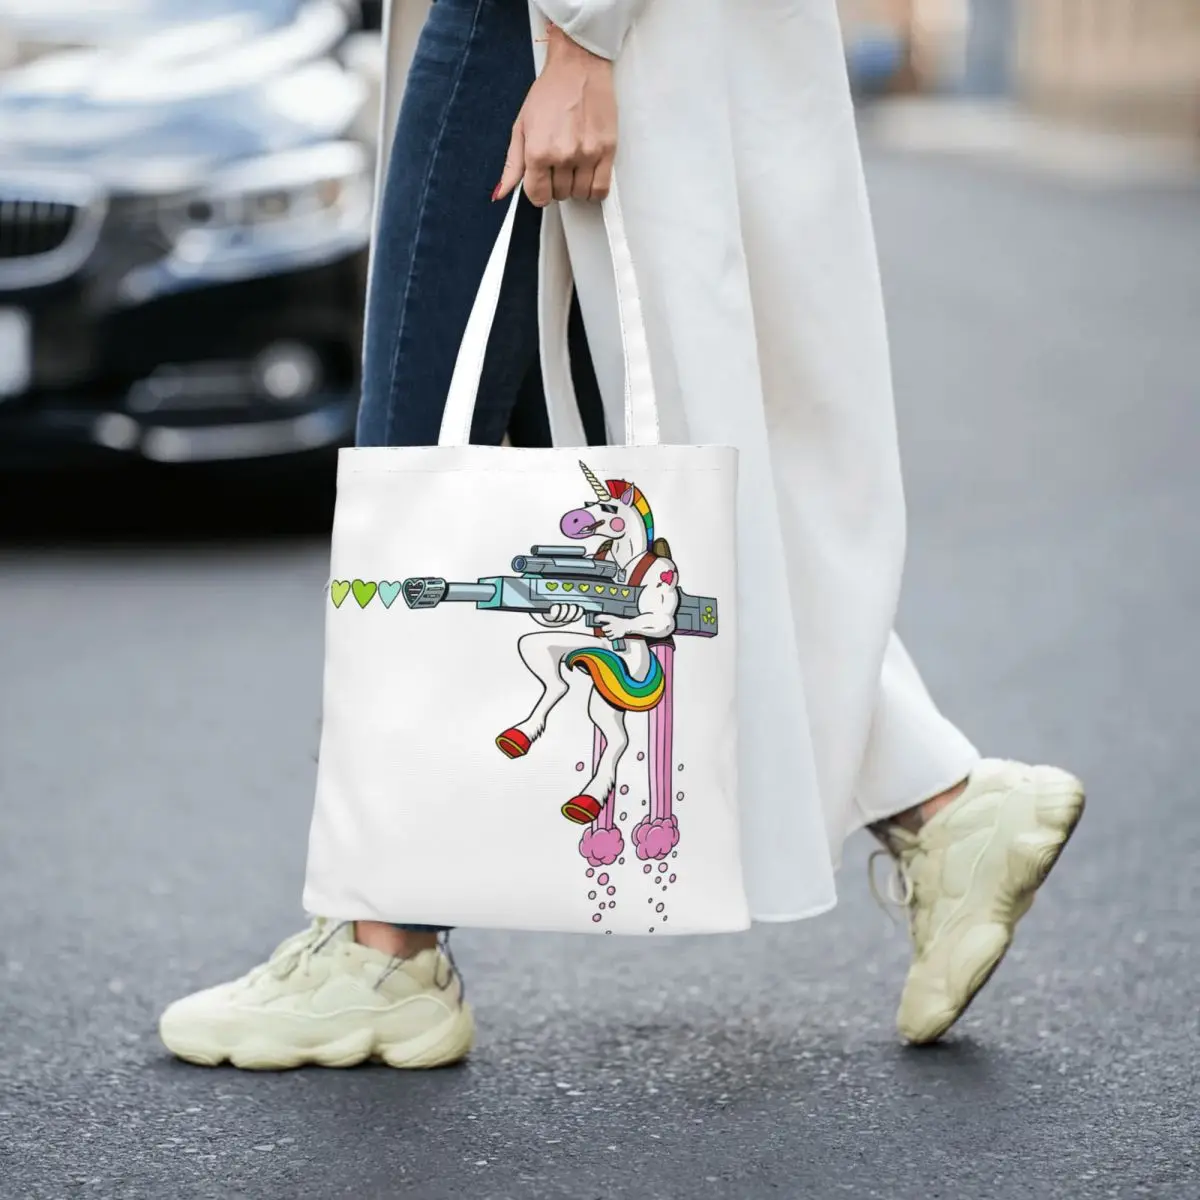 Don't With Unicorns Funny Women Canvas Handbag Large Capacity Shopper Bag Tote Bag withSmall Shoulder Bag